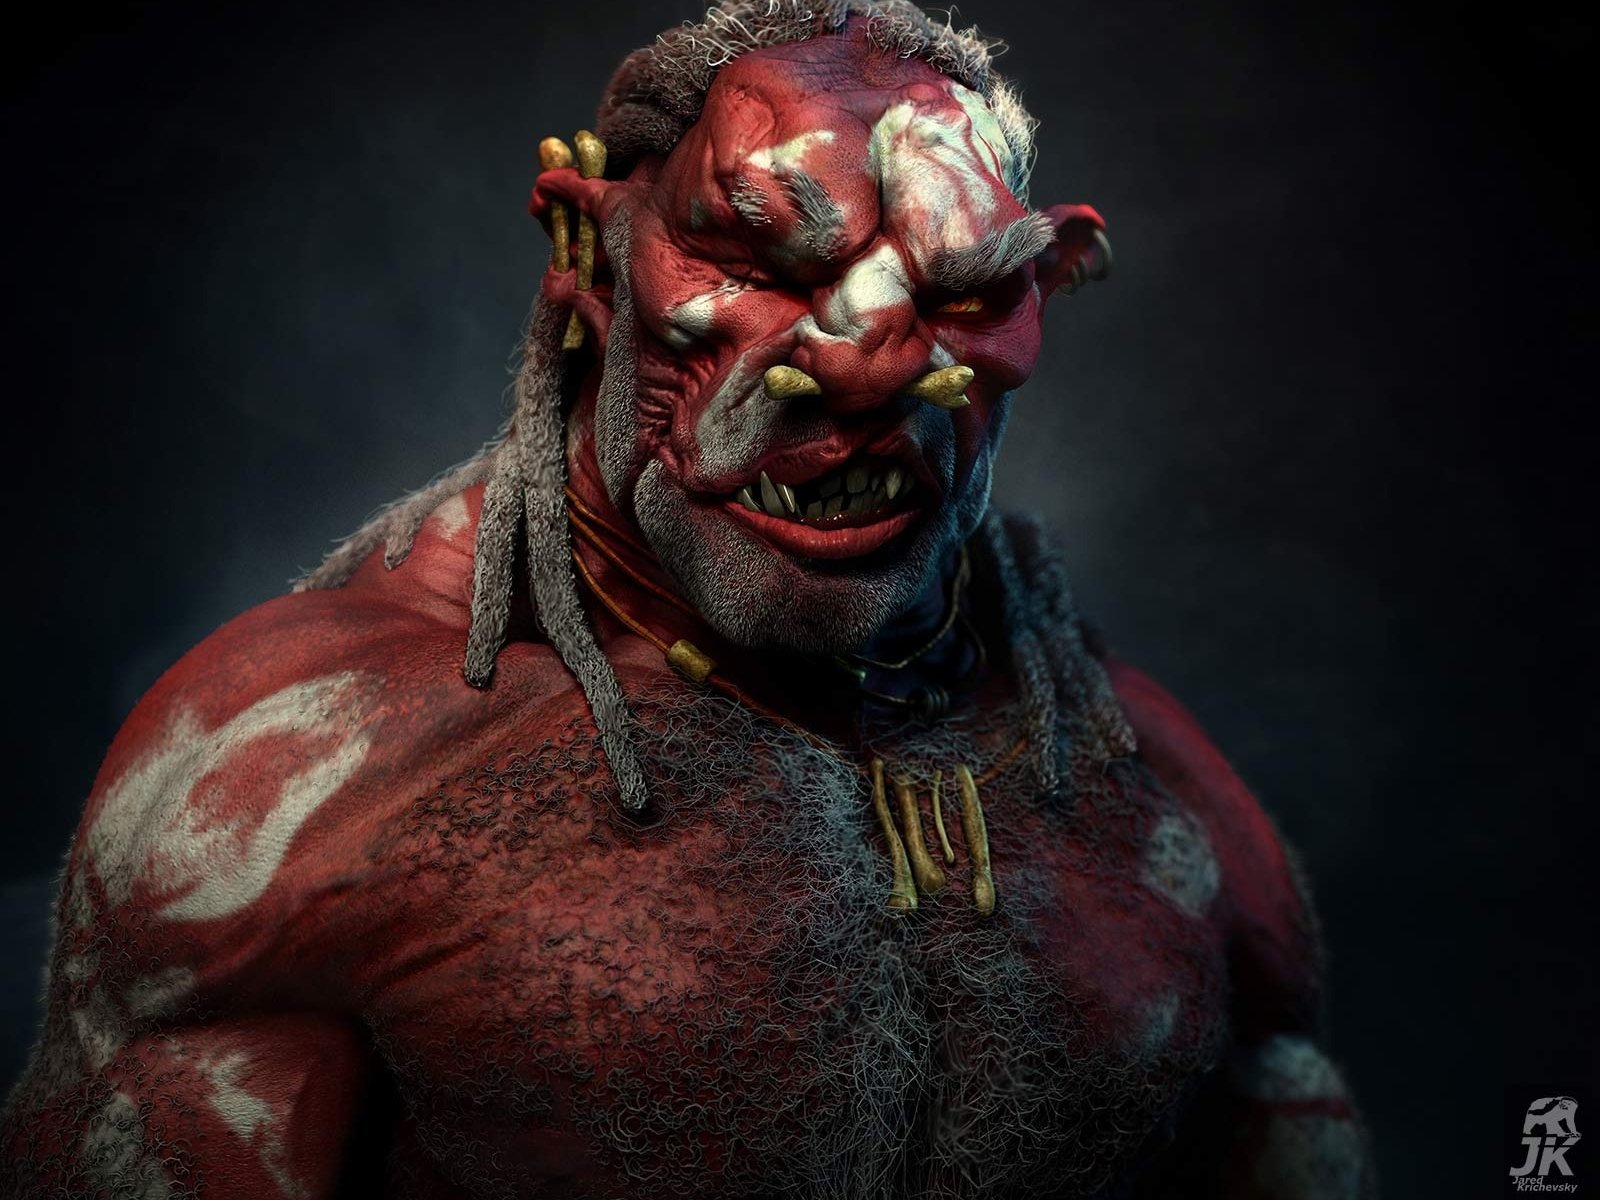 Red Orc's Rage #2